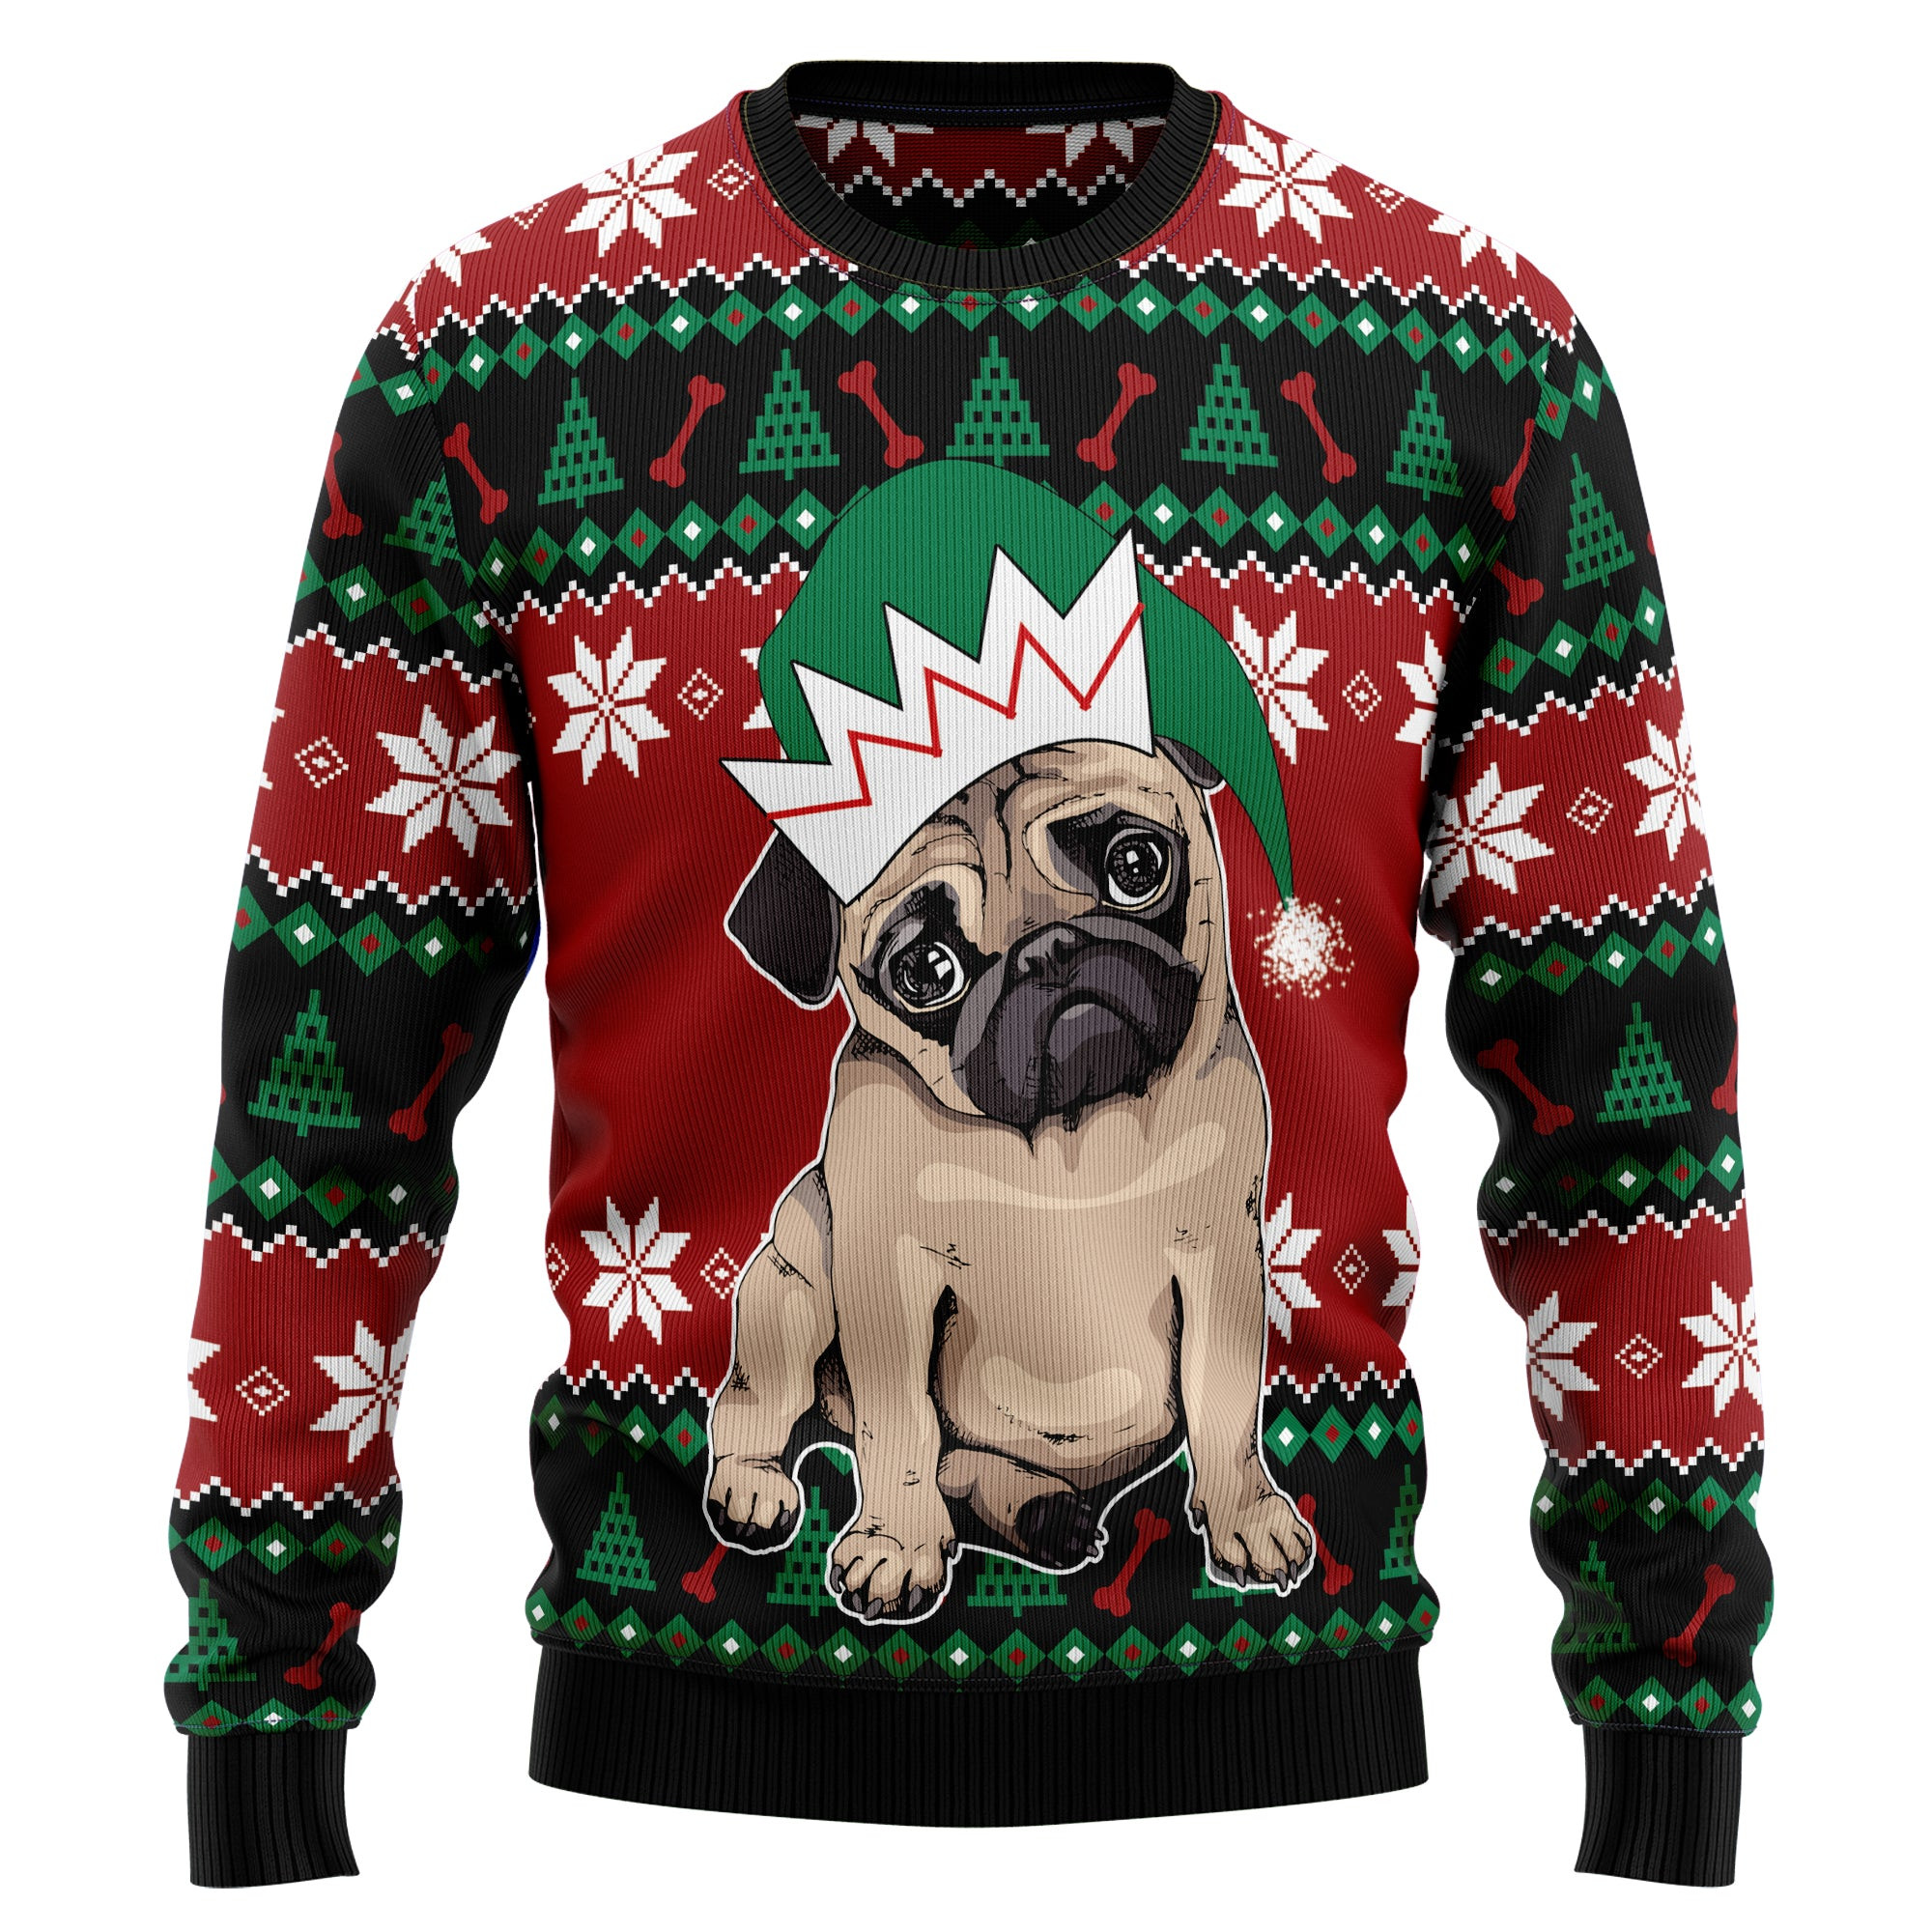 Pug Cute Ugly Christmas Sweater, Ugly Sweater For Men Women, Holiday Sweater